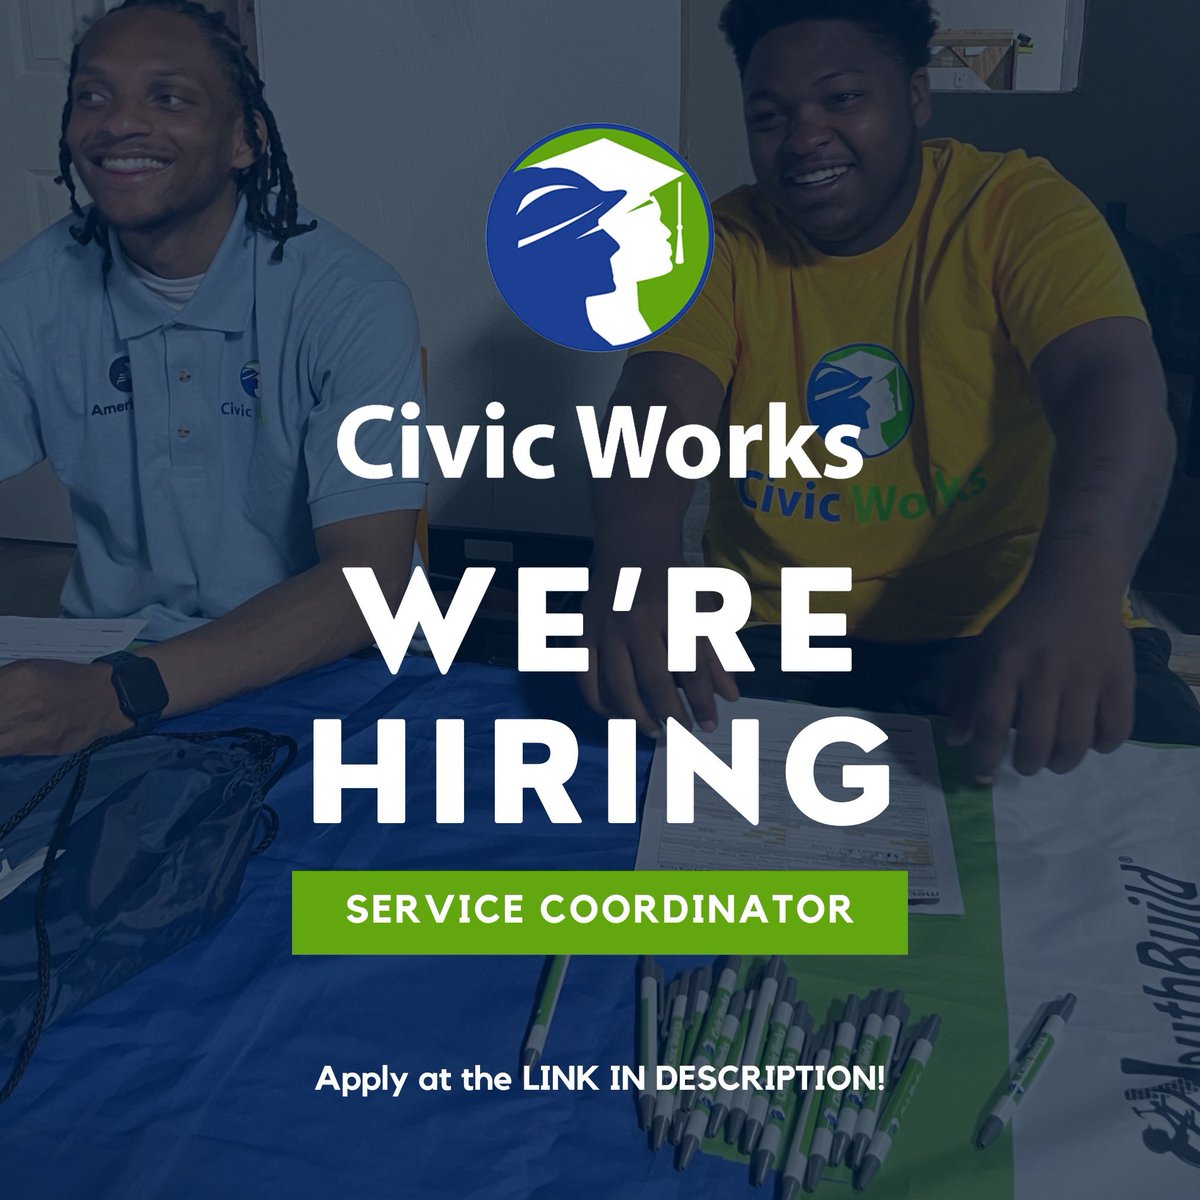 We’re HIRING for a Service Coordinator! Learn more about the position and APPLY at the link here: paycomonline.net/v4/ats/web.php…